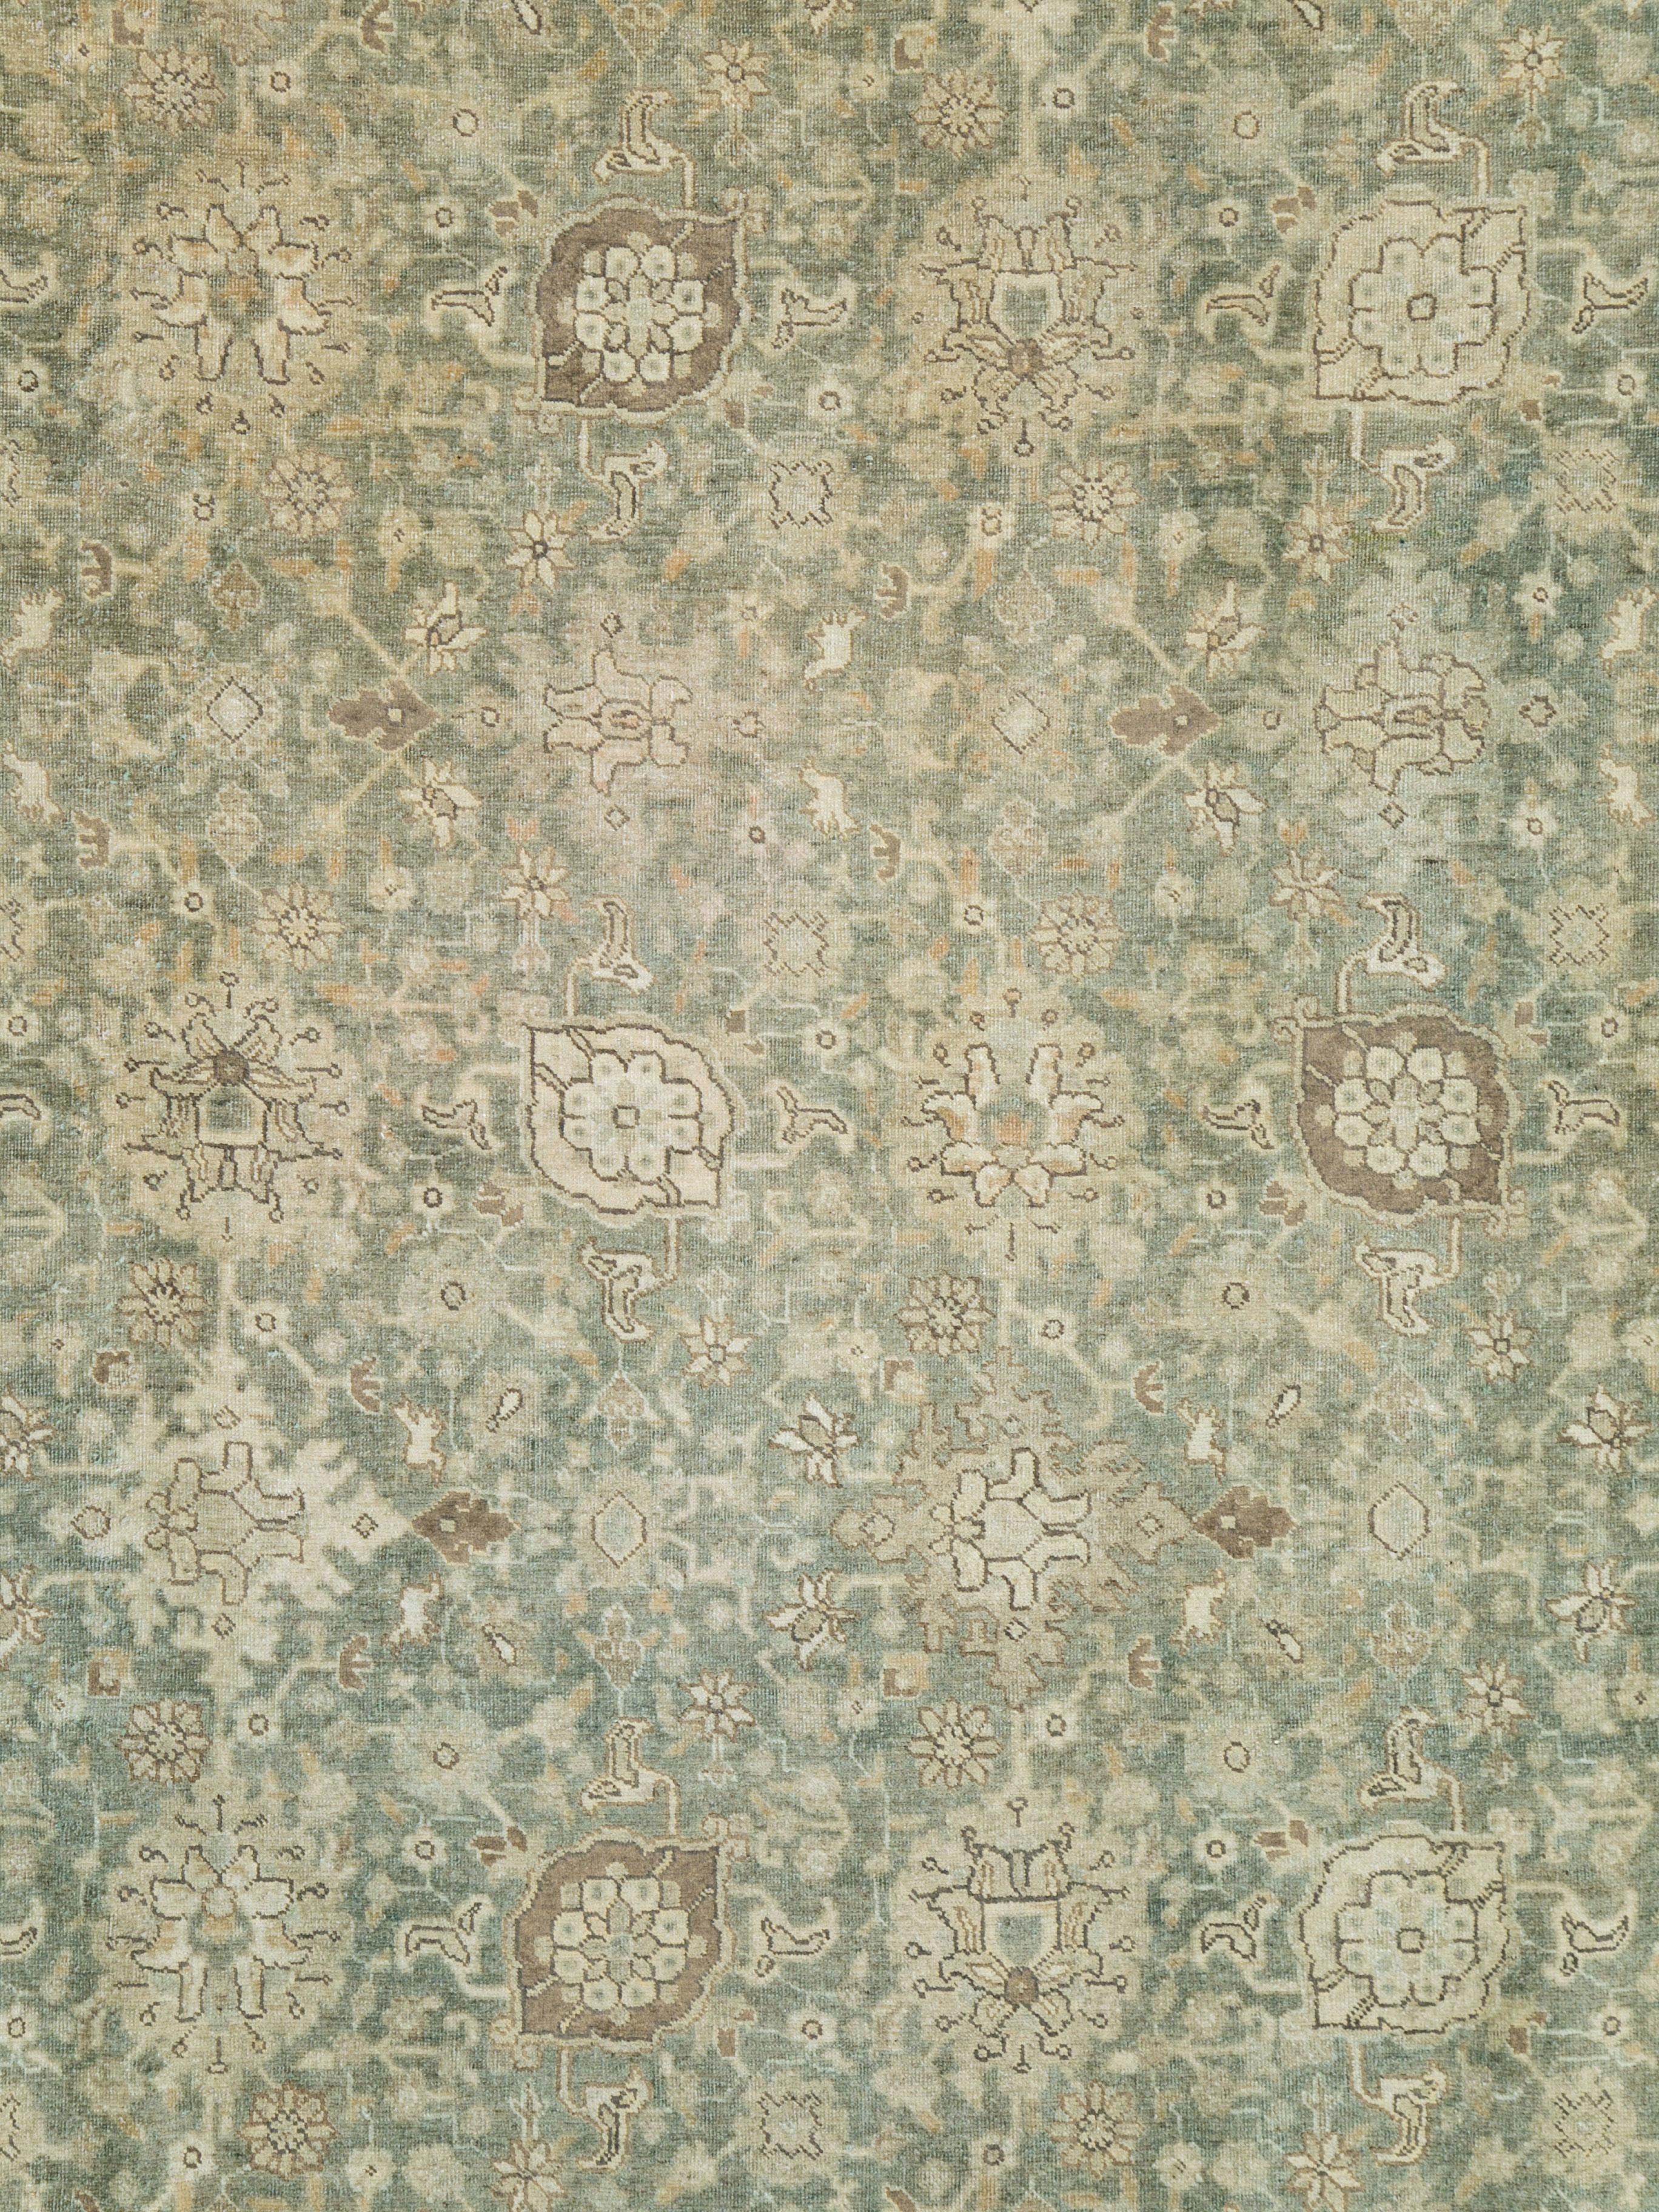 An antique Persian Tabriz carpet from the early 20th century.